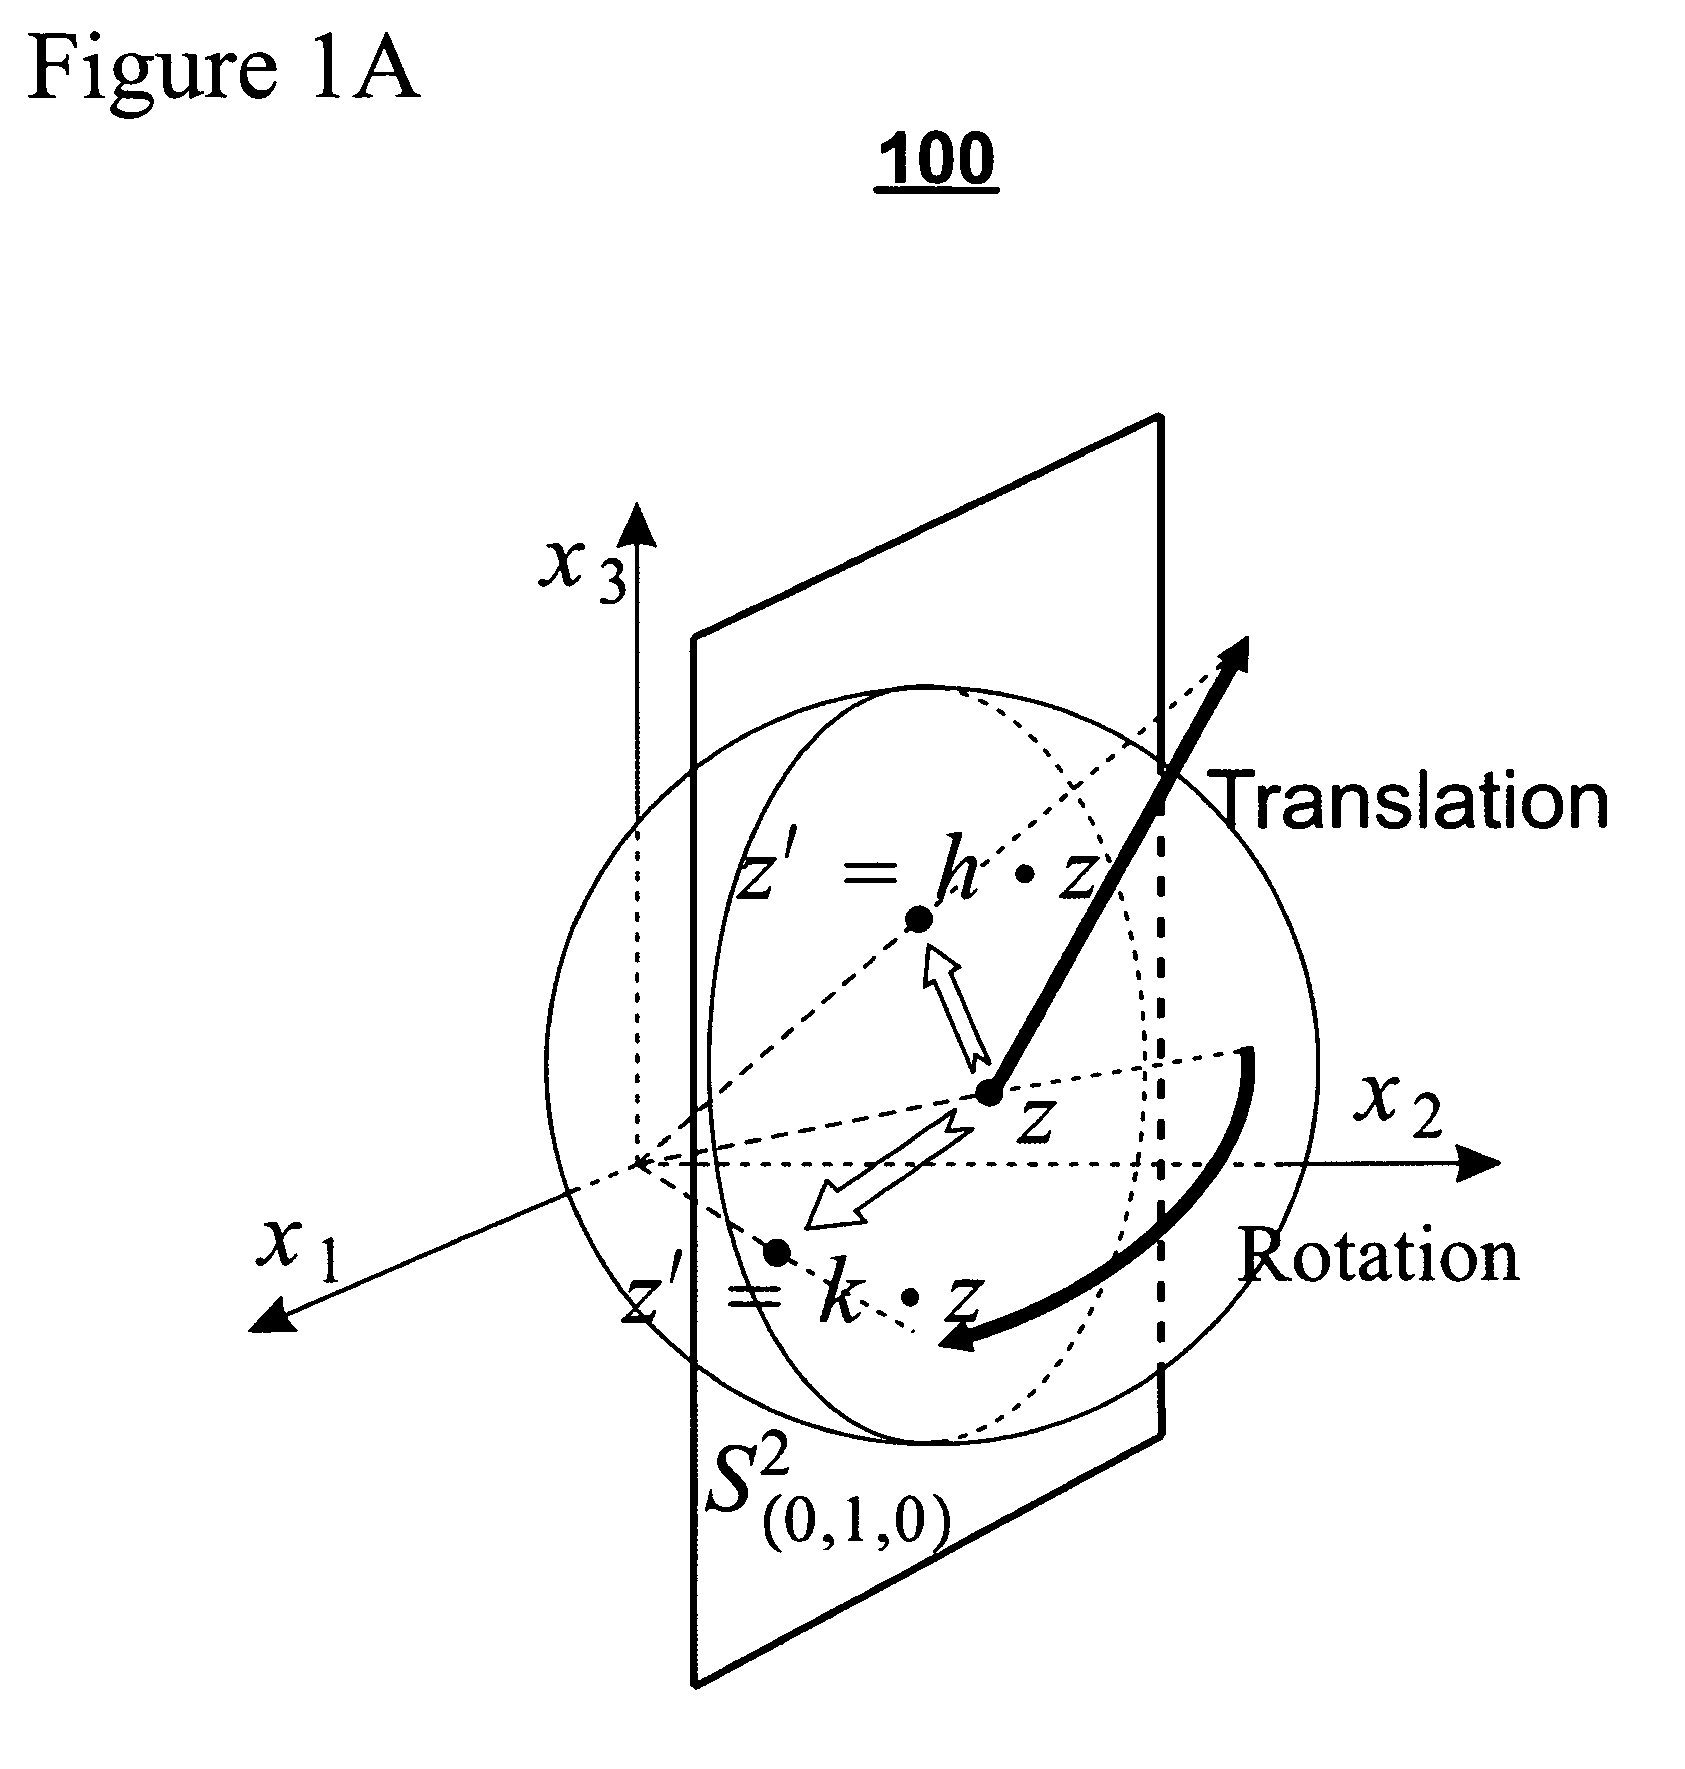 Image processing method for object recognition and dynamic scene understanding